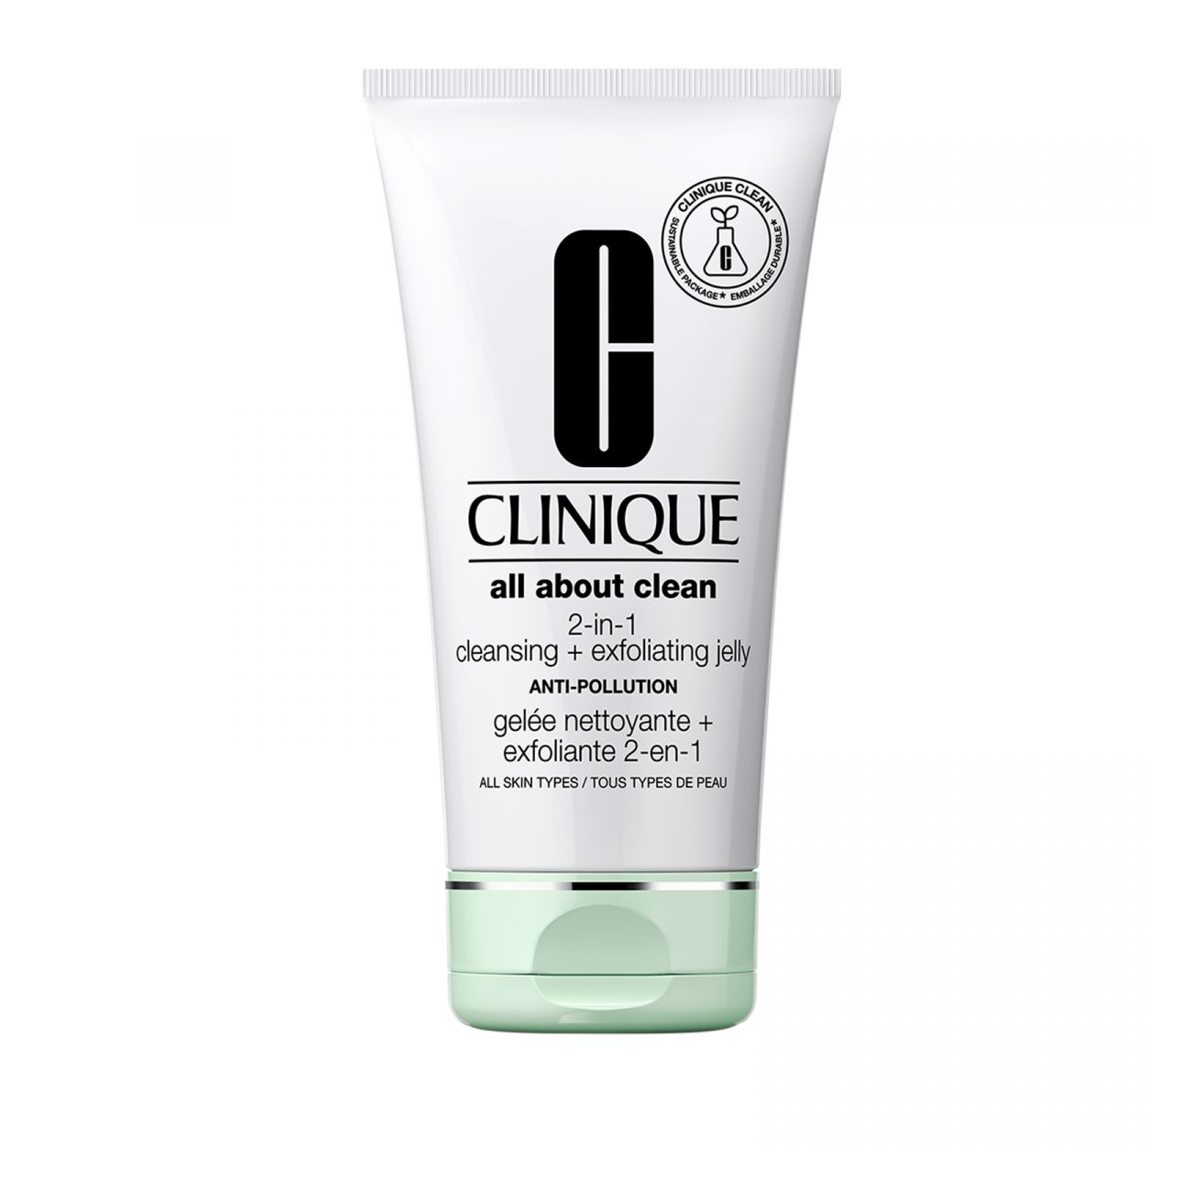 Clinique All About Clean 2-in-1 Cleanser + Exfoliating Jelly Anti-Pollution 150 ml